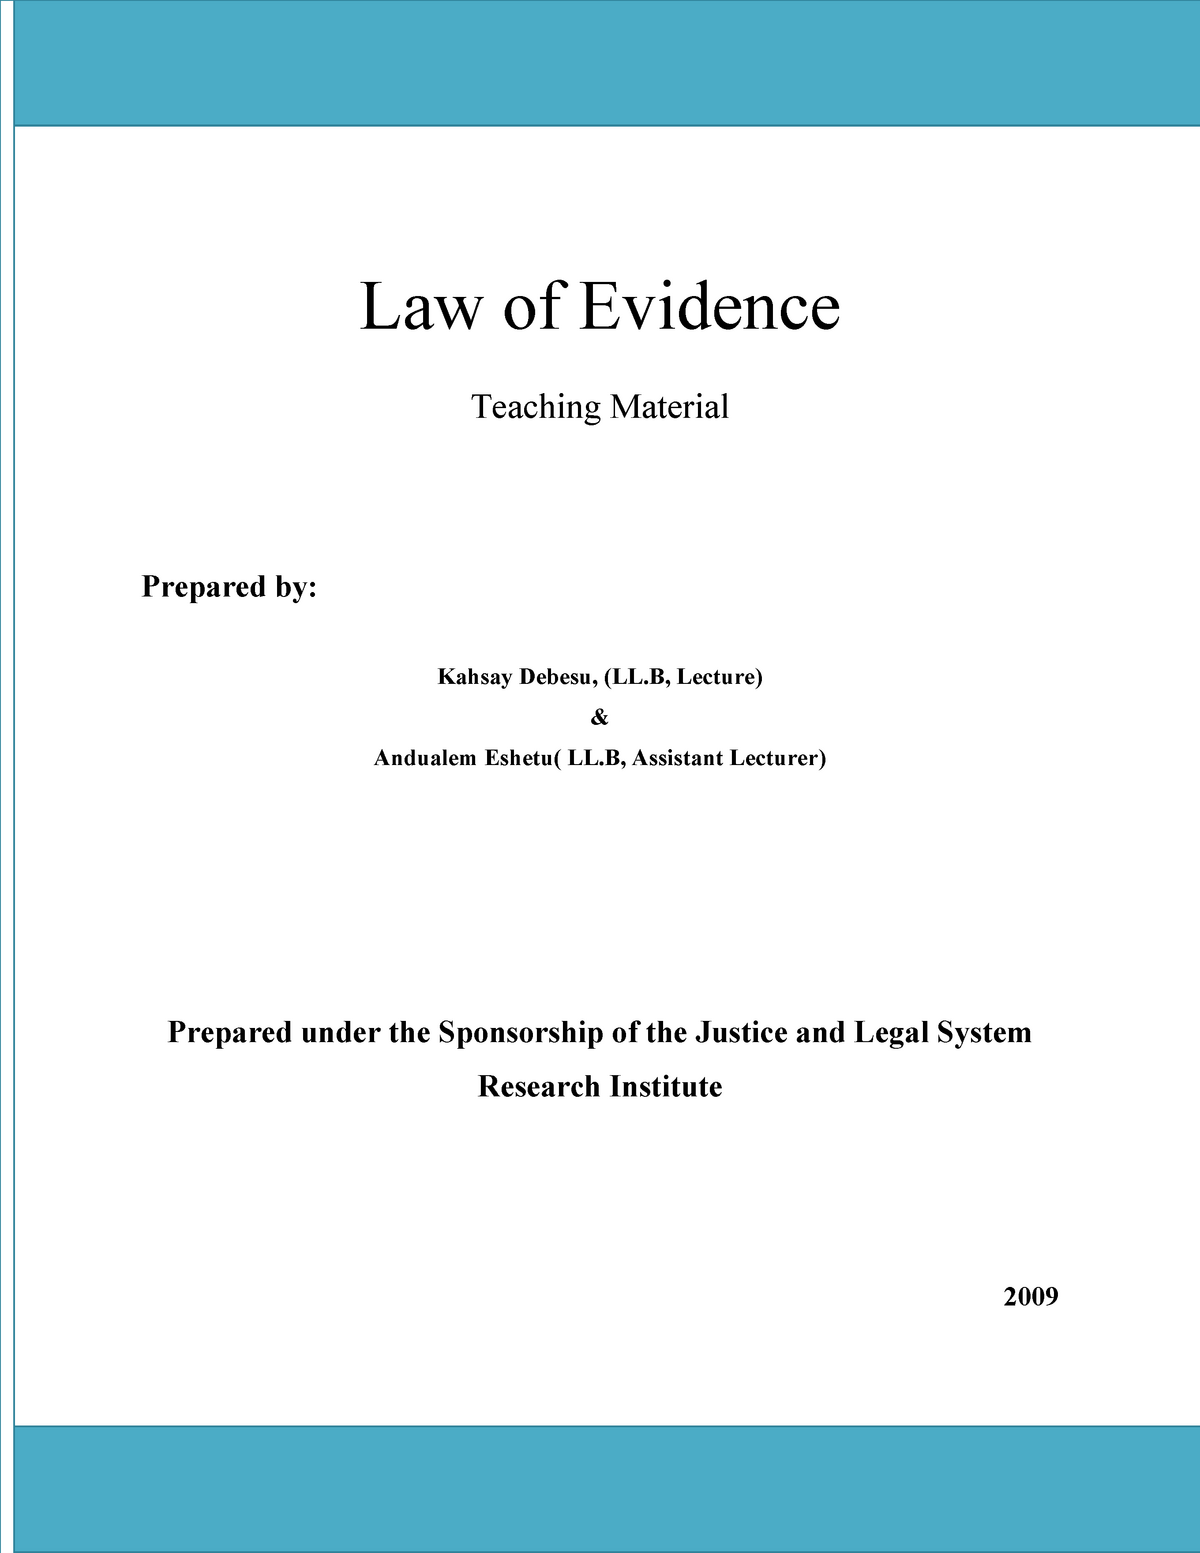 thesis on law of evidence